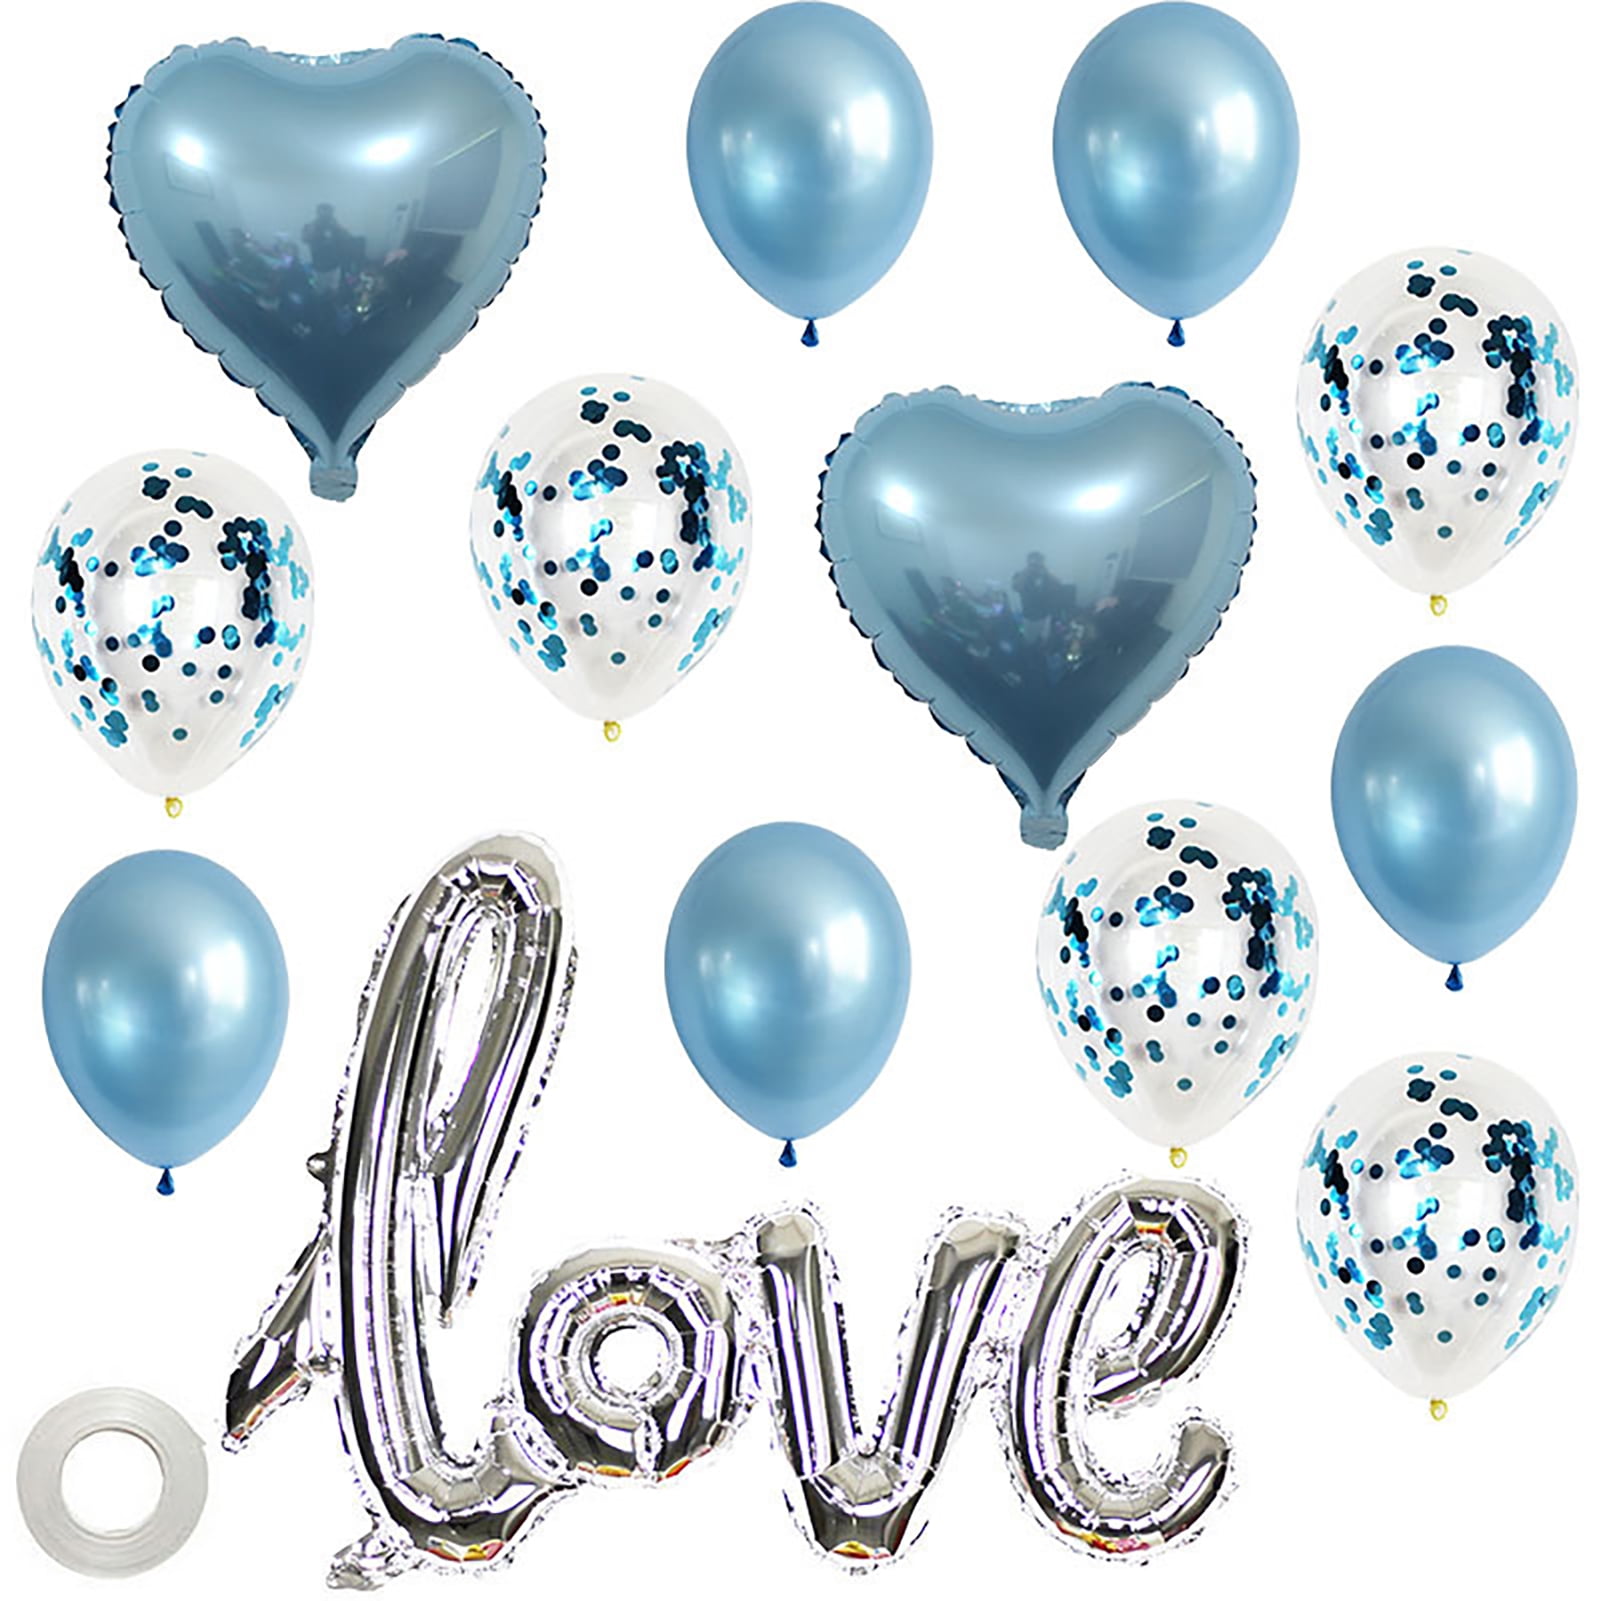 25-100 I Love You Balloons Heart Shape  Valentines Day Romantic Baloons His/Her 